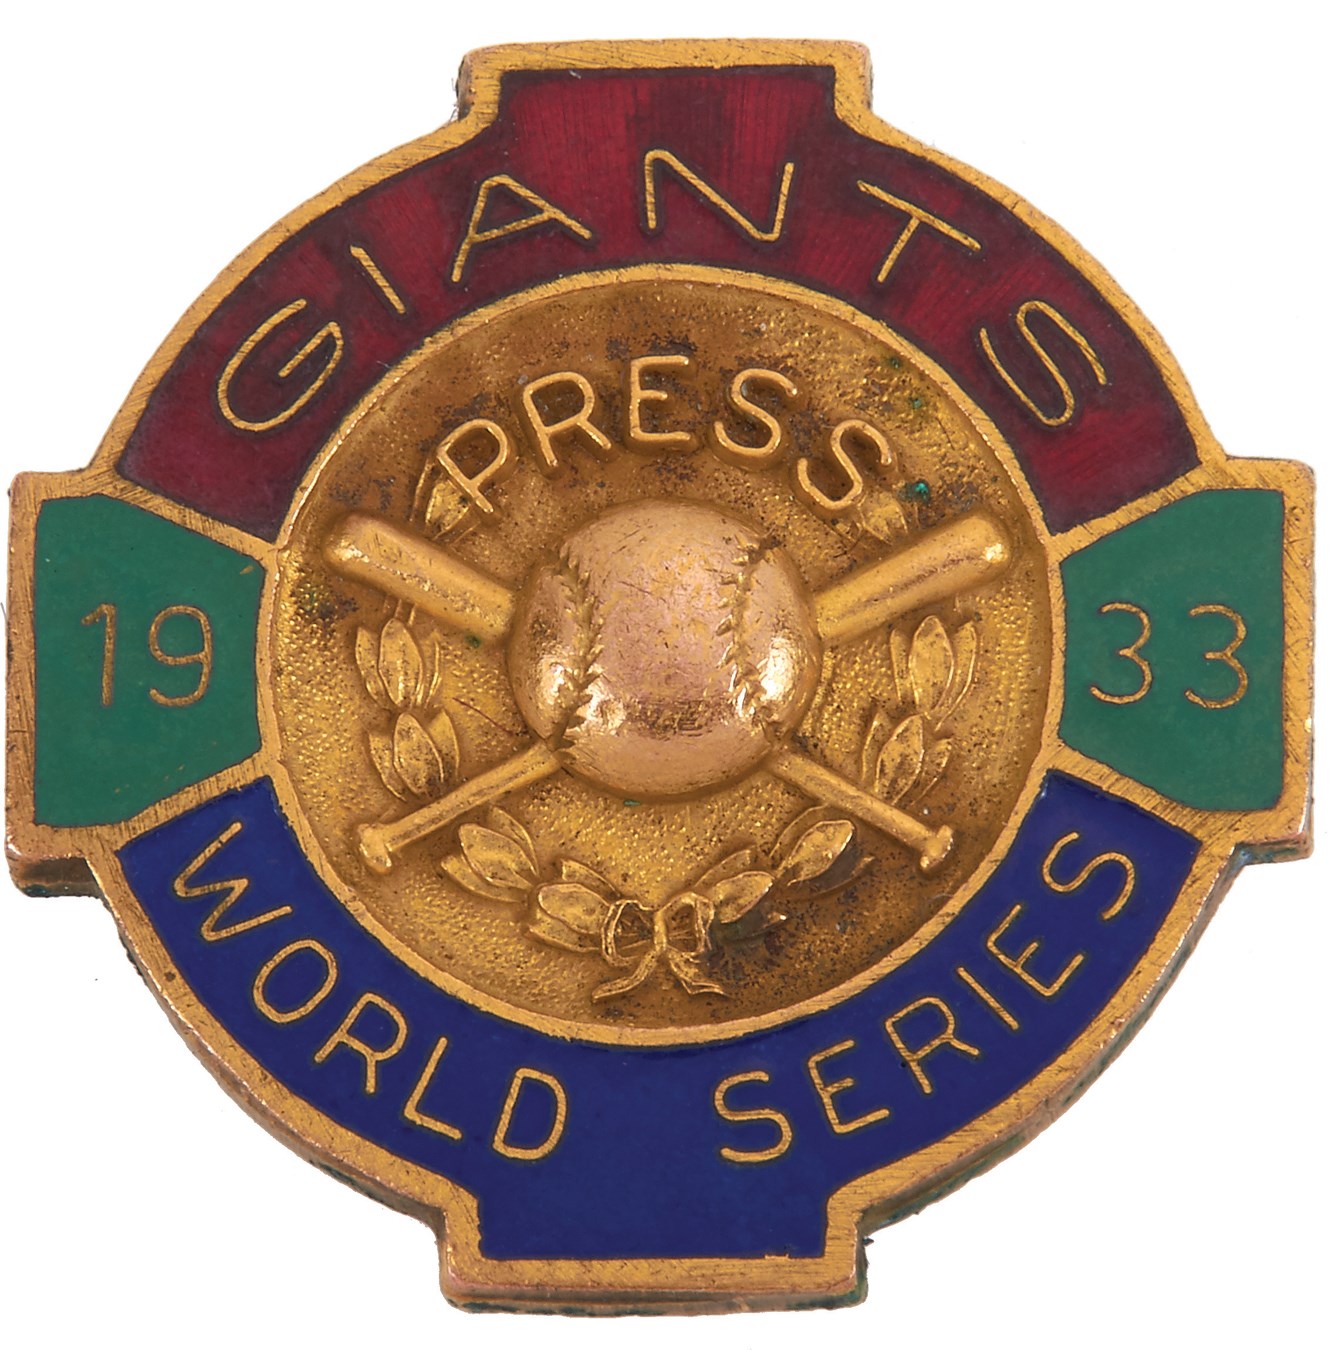 Tickets, Publications & Pins - 1933 New York Giants World Series Press Pin